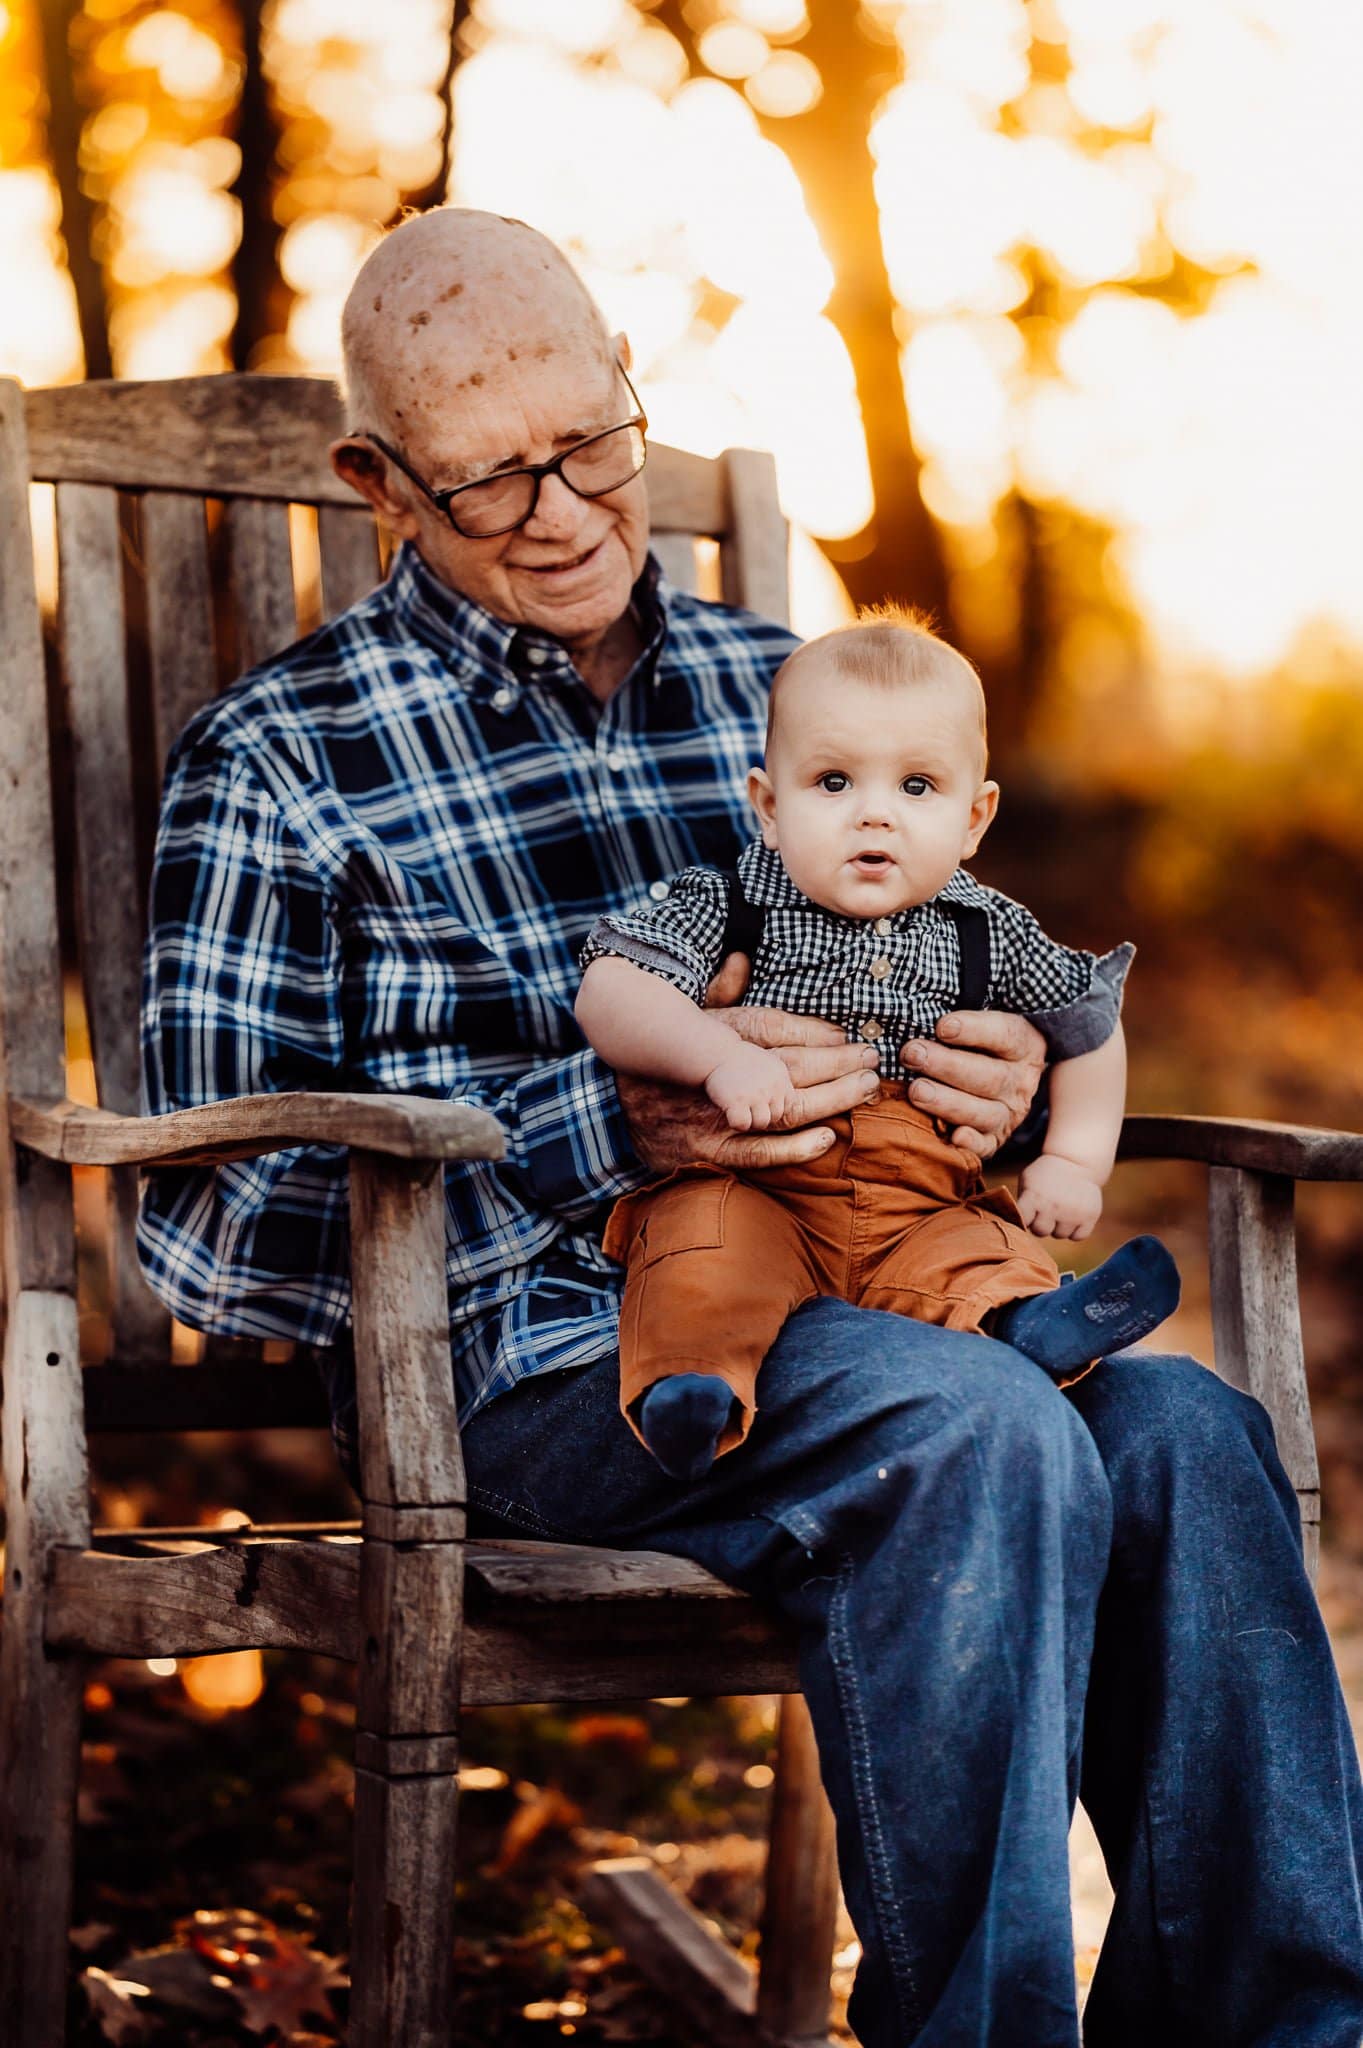 Grandfather and baby in rocking chair